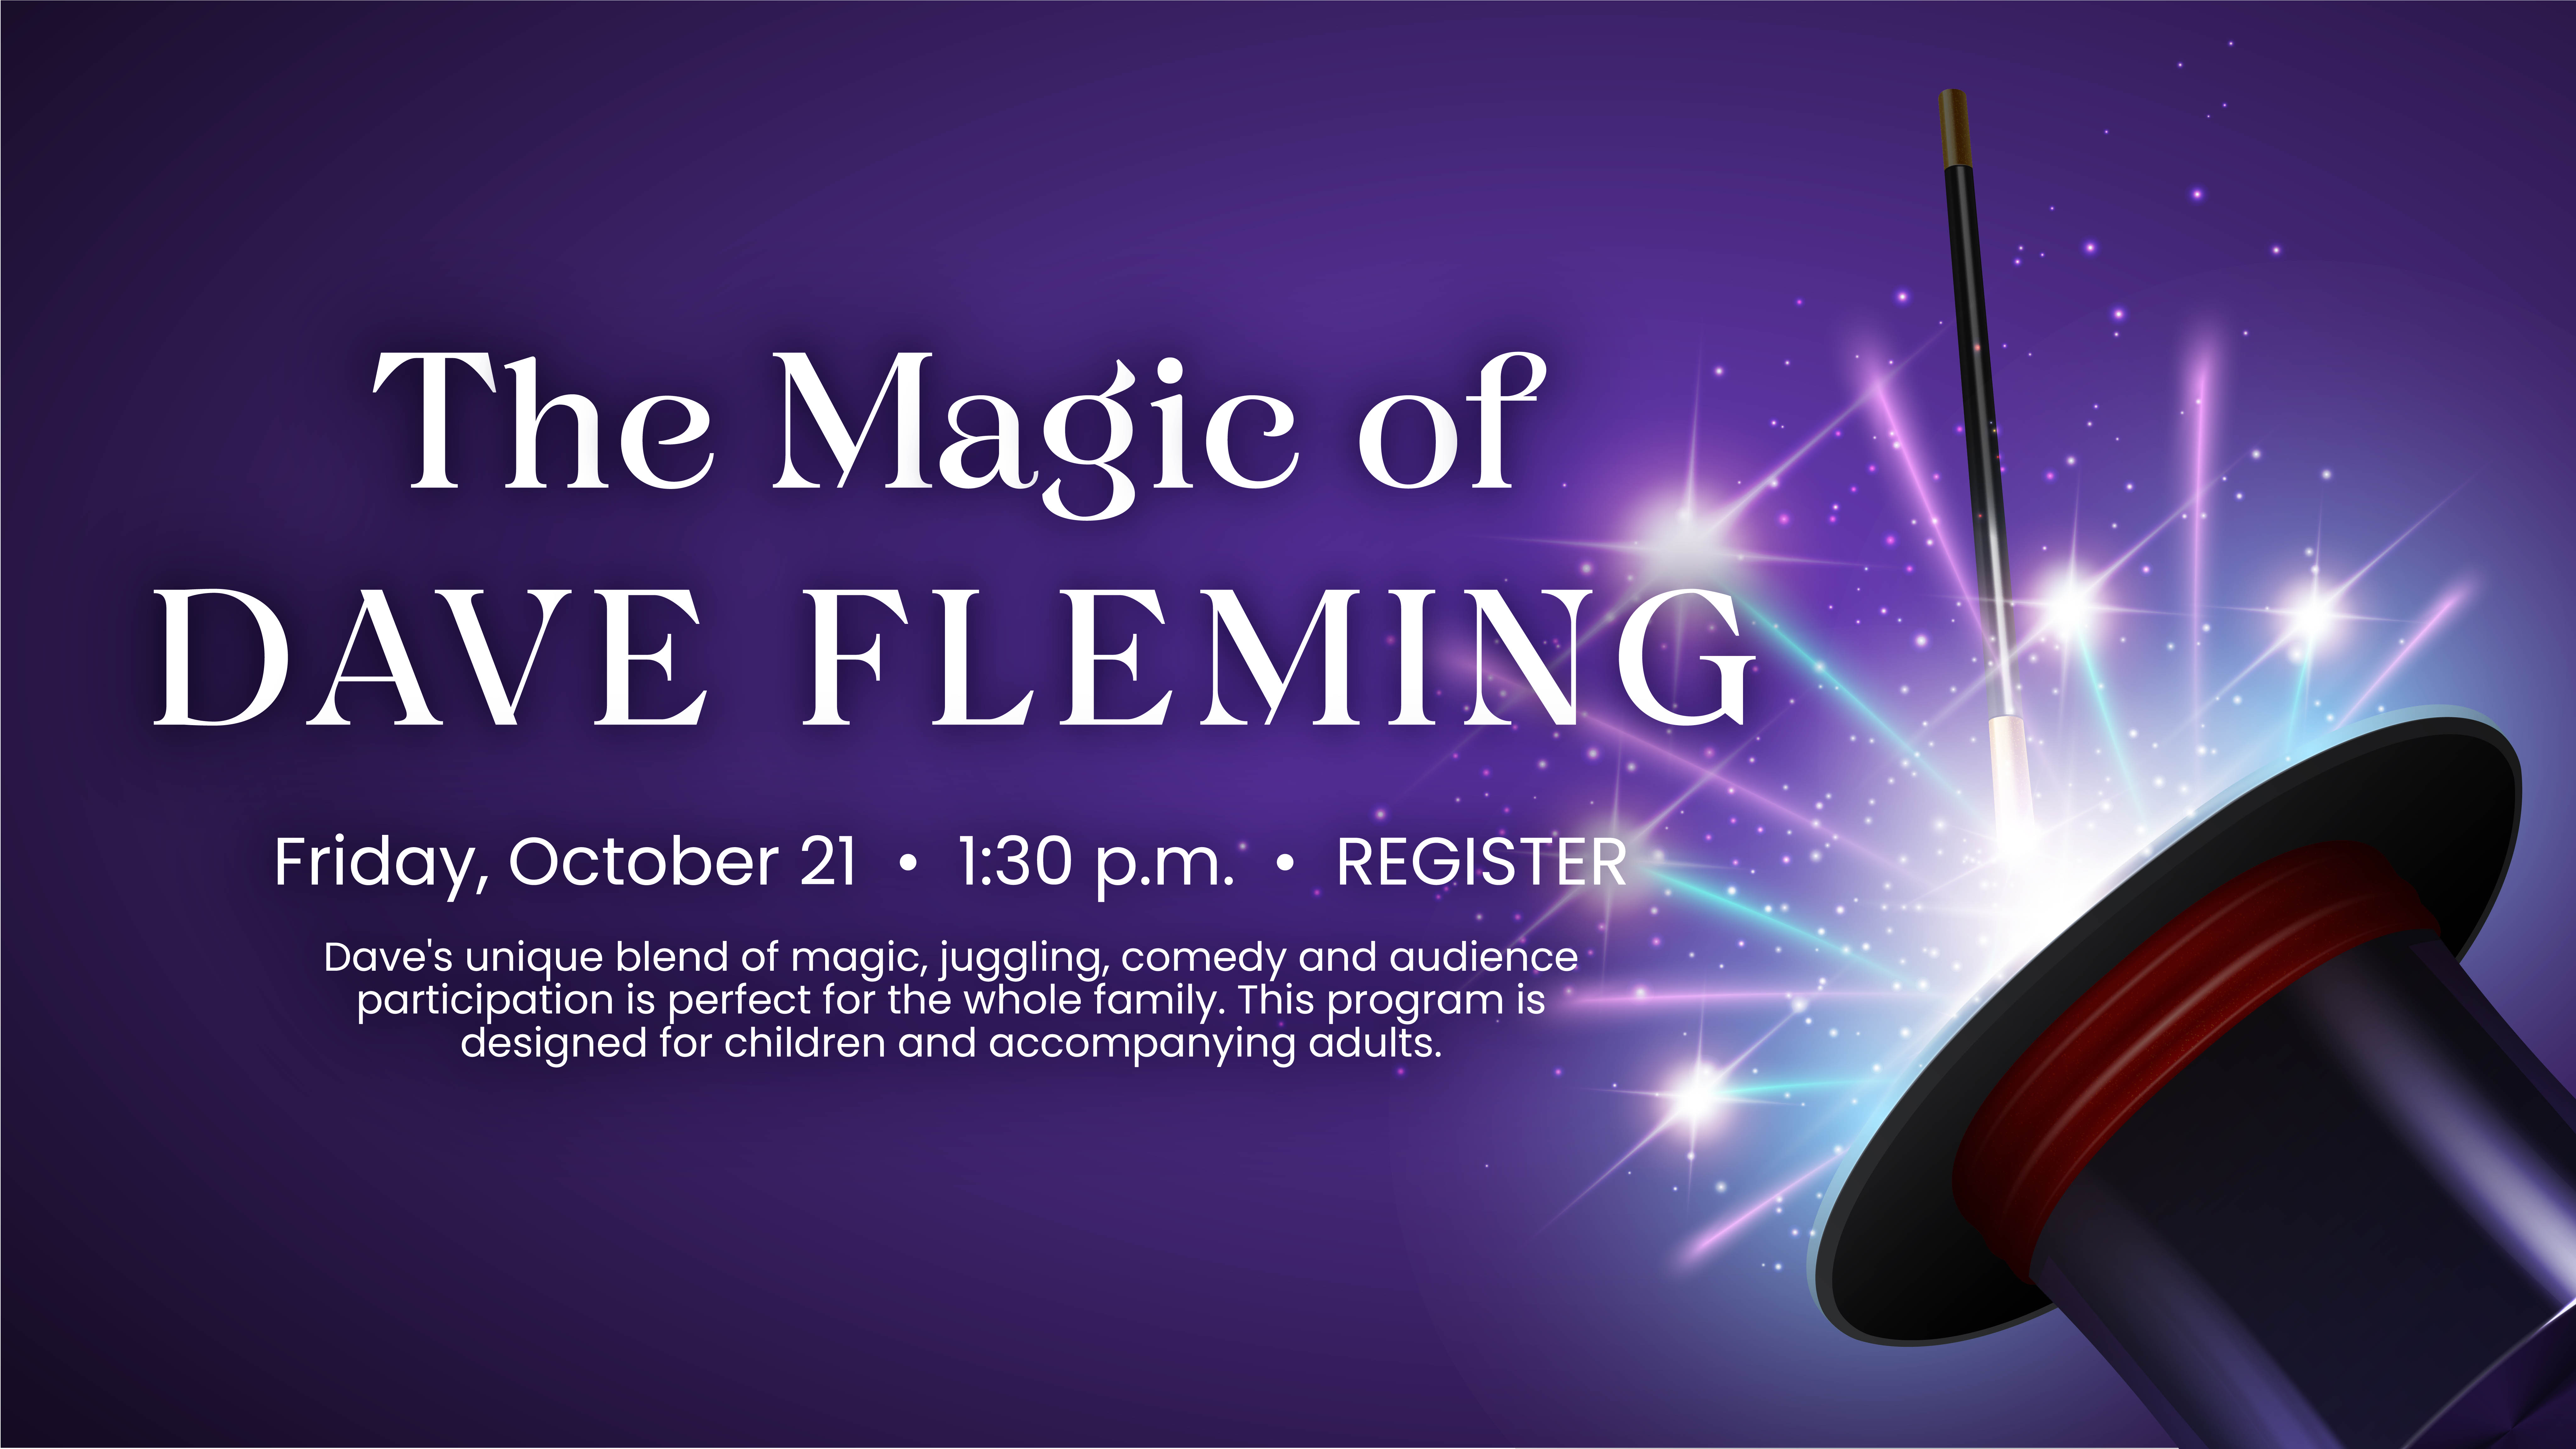 The Magic of Dave Flemming